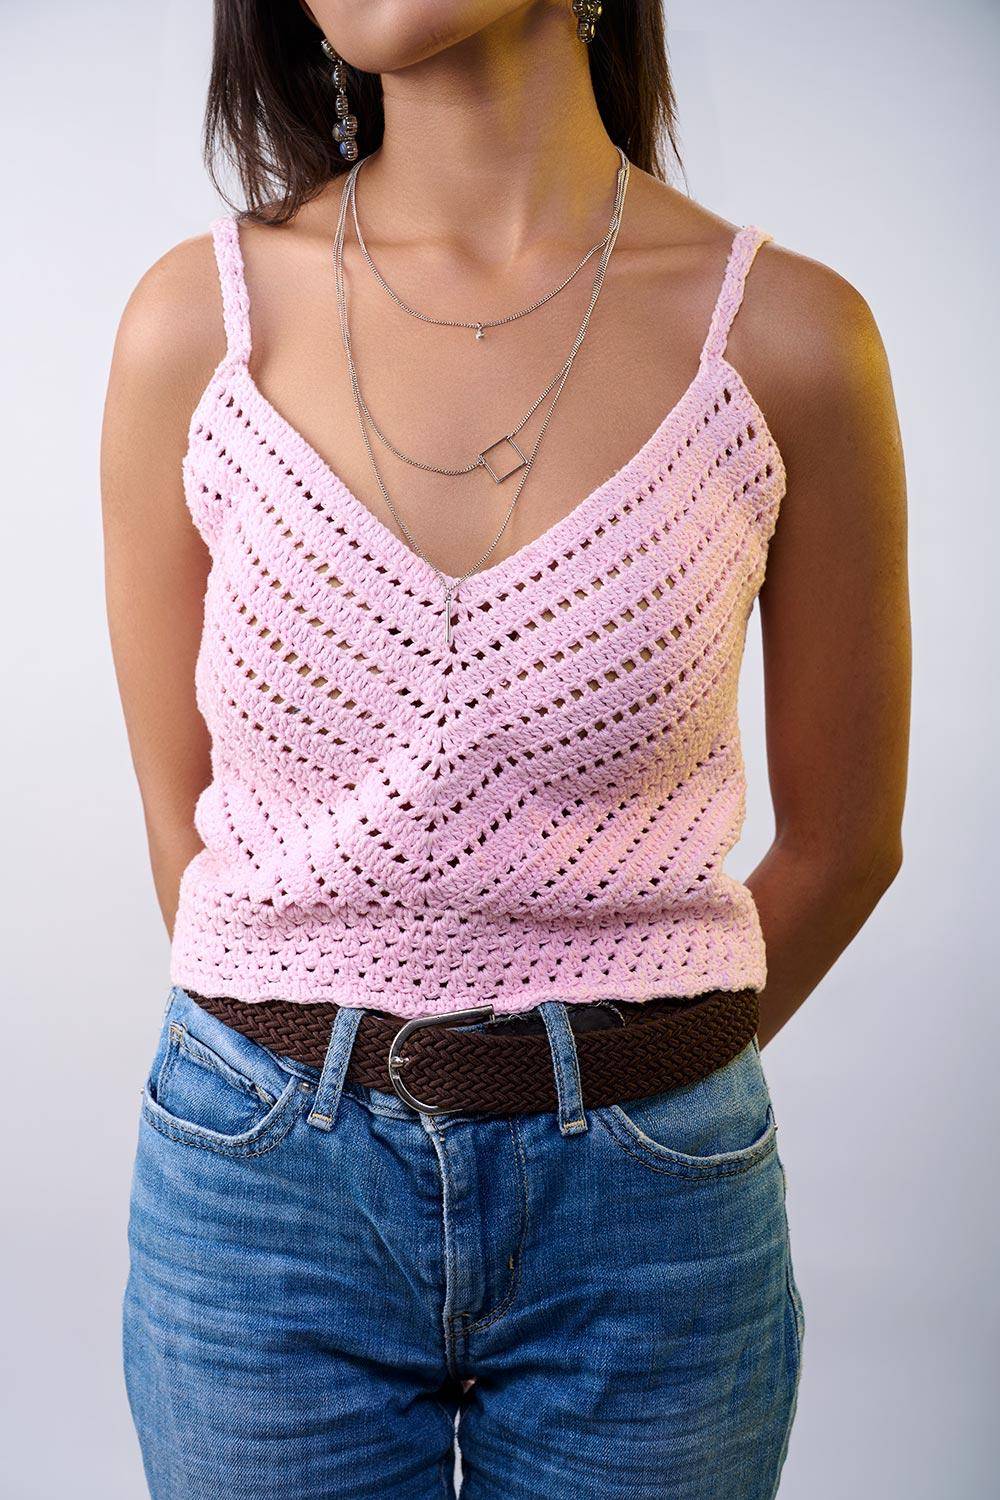 Buy Crochet Perky Pink Top In the Best Price - Hand Knitted Crochet Top & Bralette 1